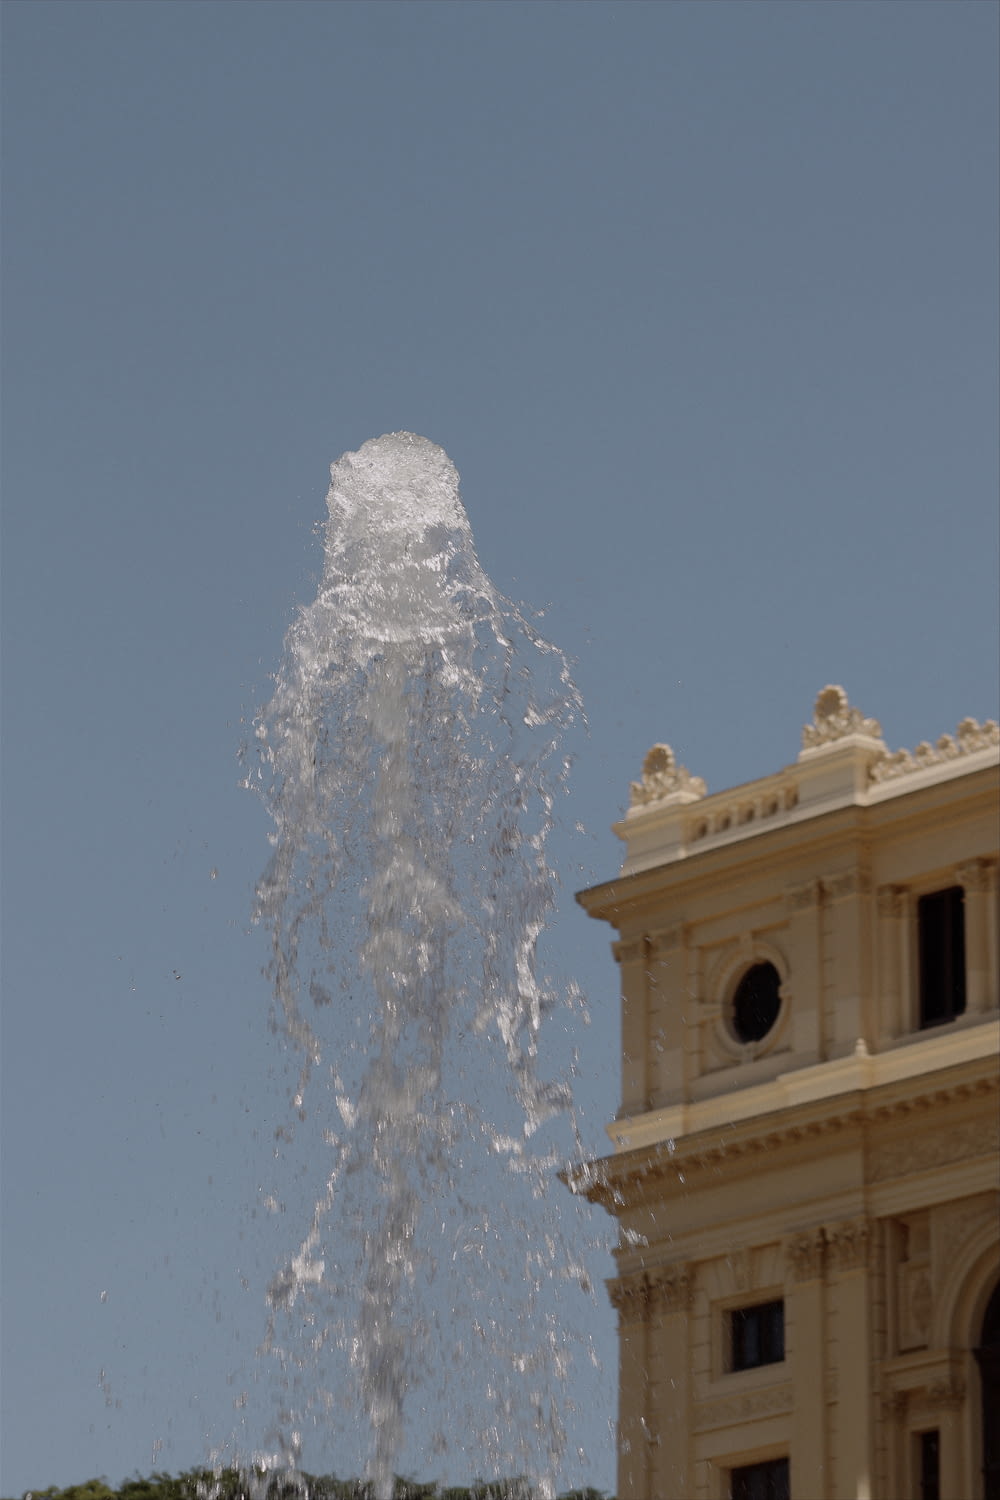 a large water fountain spewing out of the top of a building